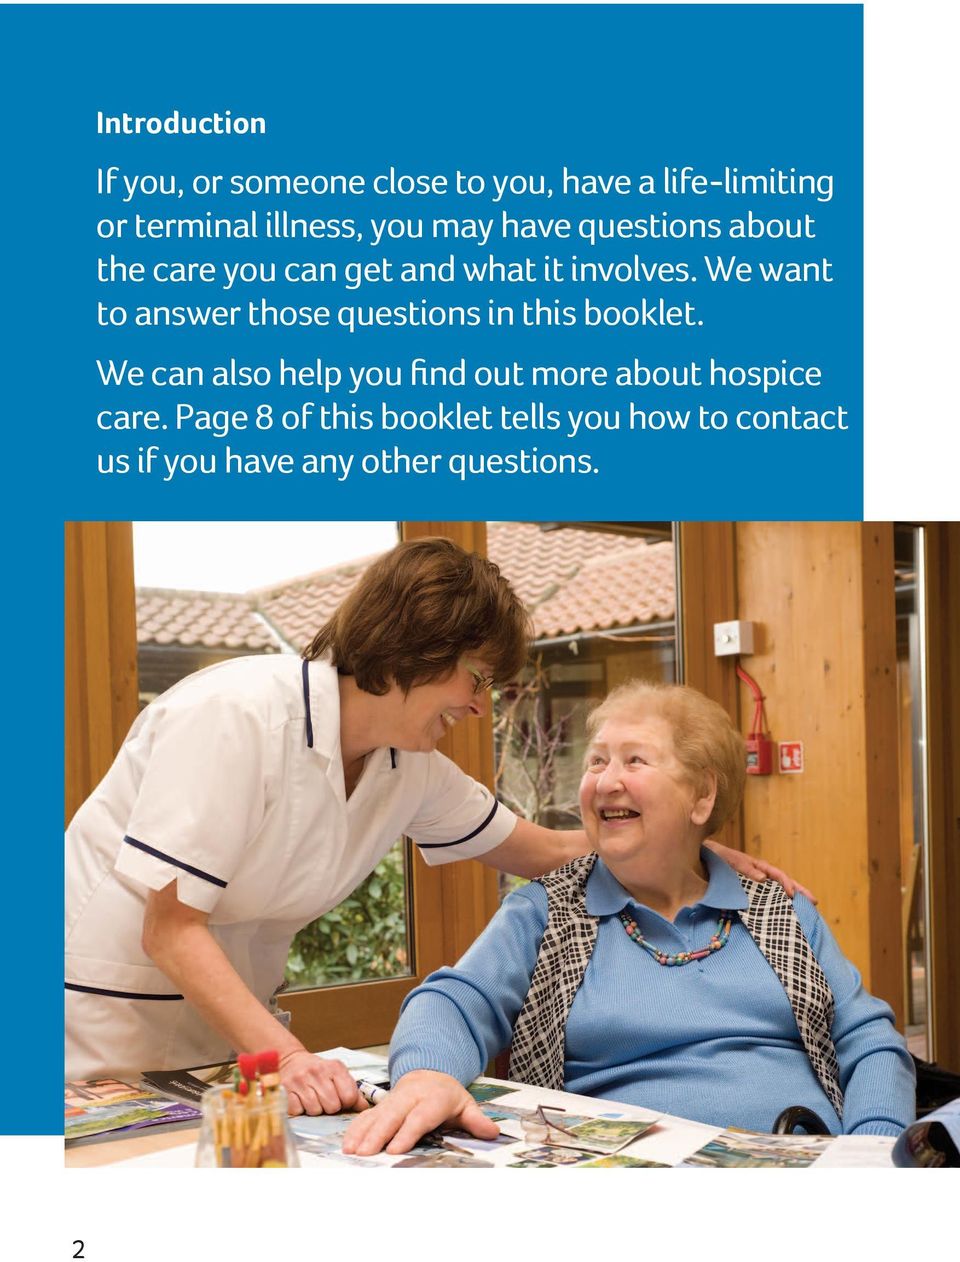 We want to answer those questions in this booklet.